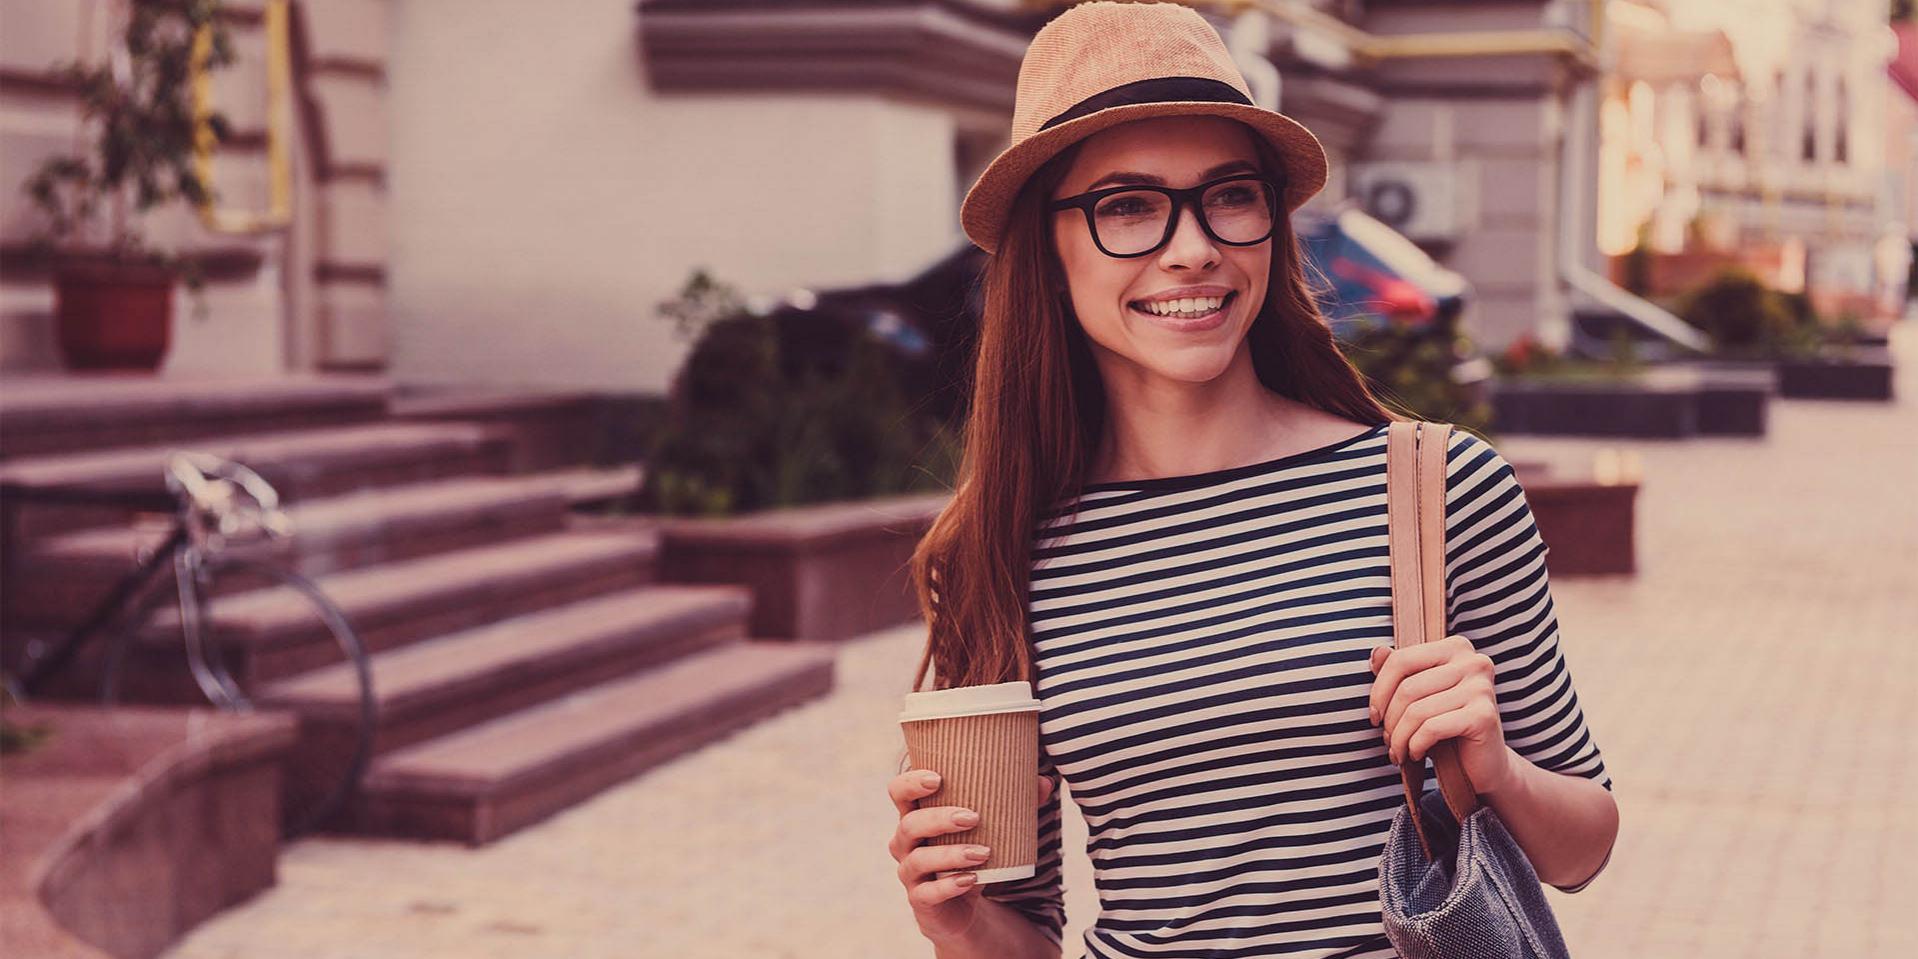 A young woman with a cap and glasses carries a coffee mug (right side) and a bag on her left shoulder